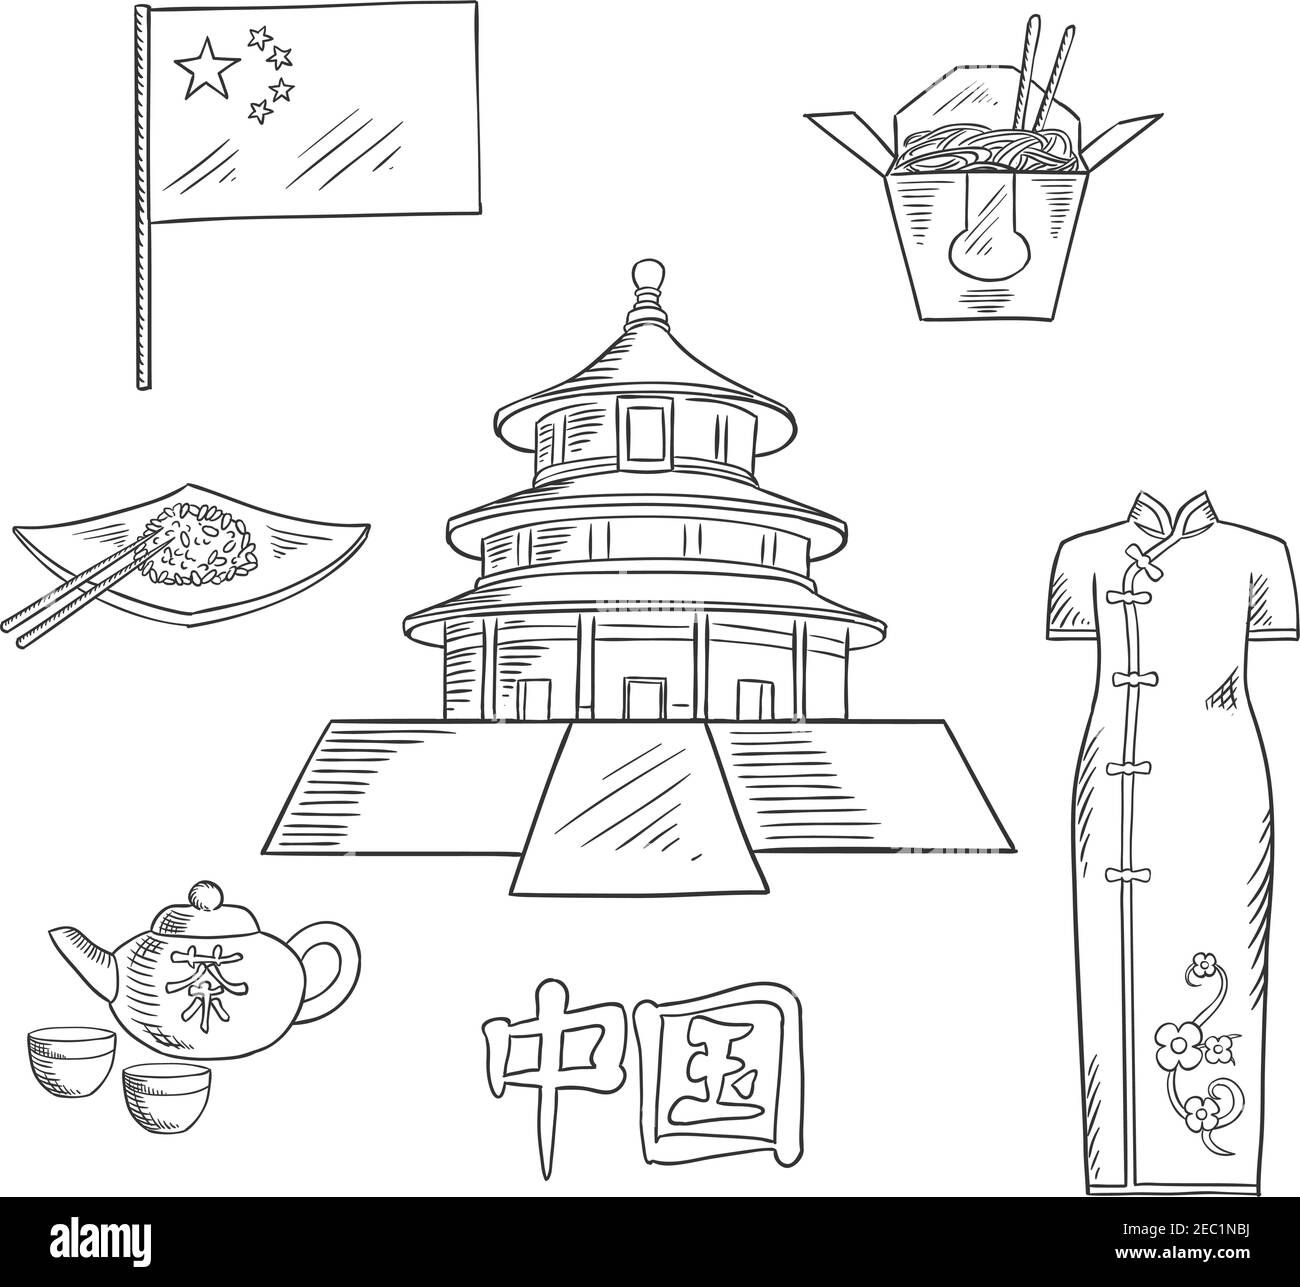 Sketch Chinese Temple Vector Stock Vector Royalty Free 1324946624   Shutterstock